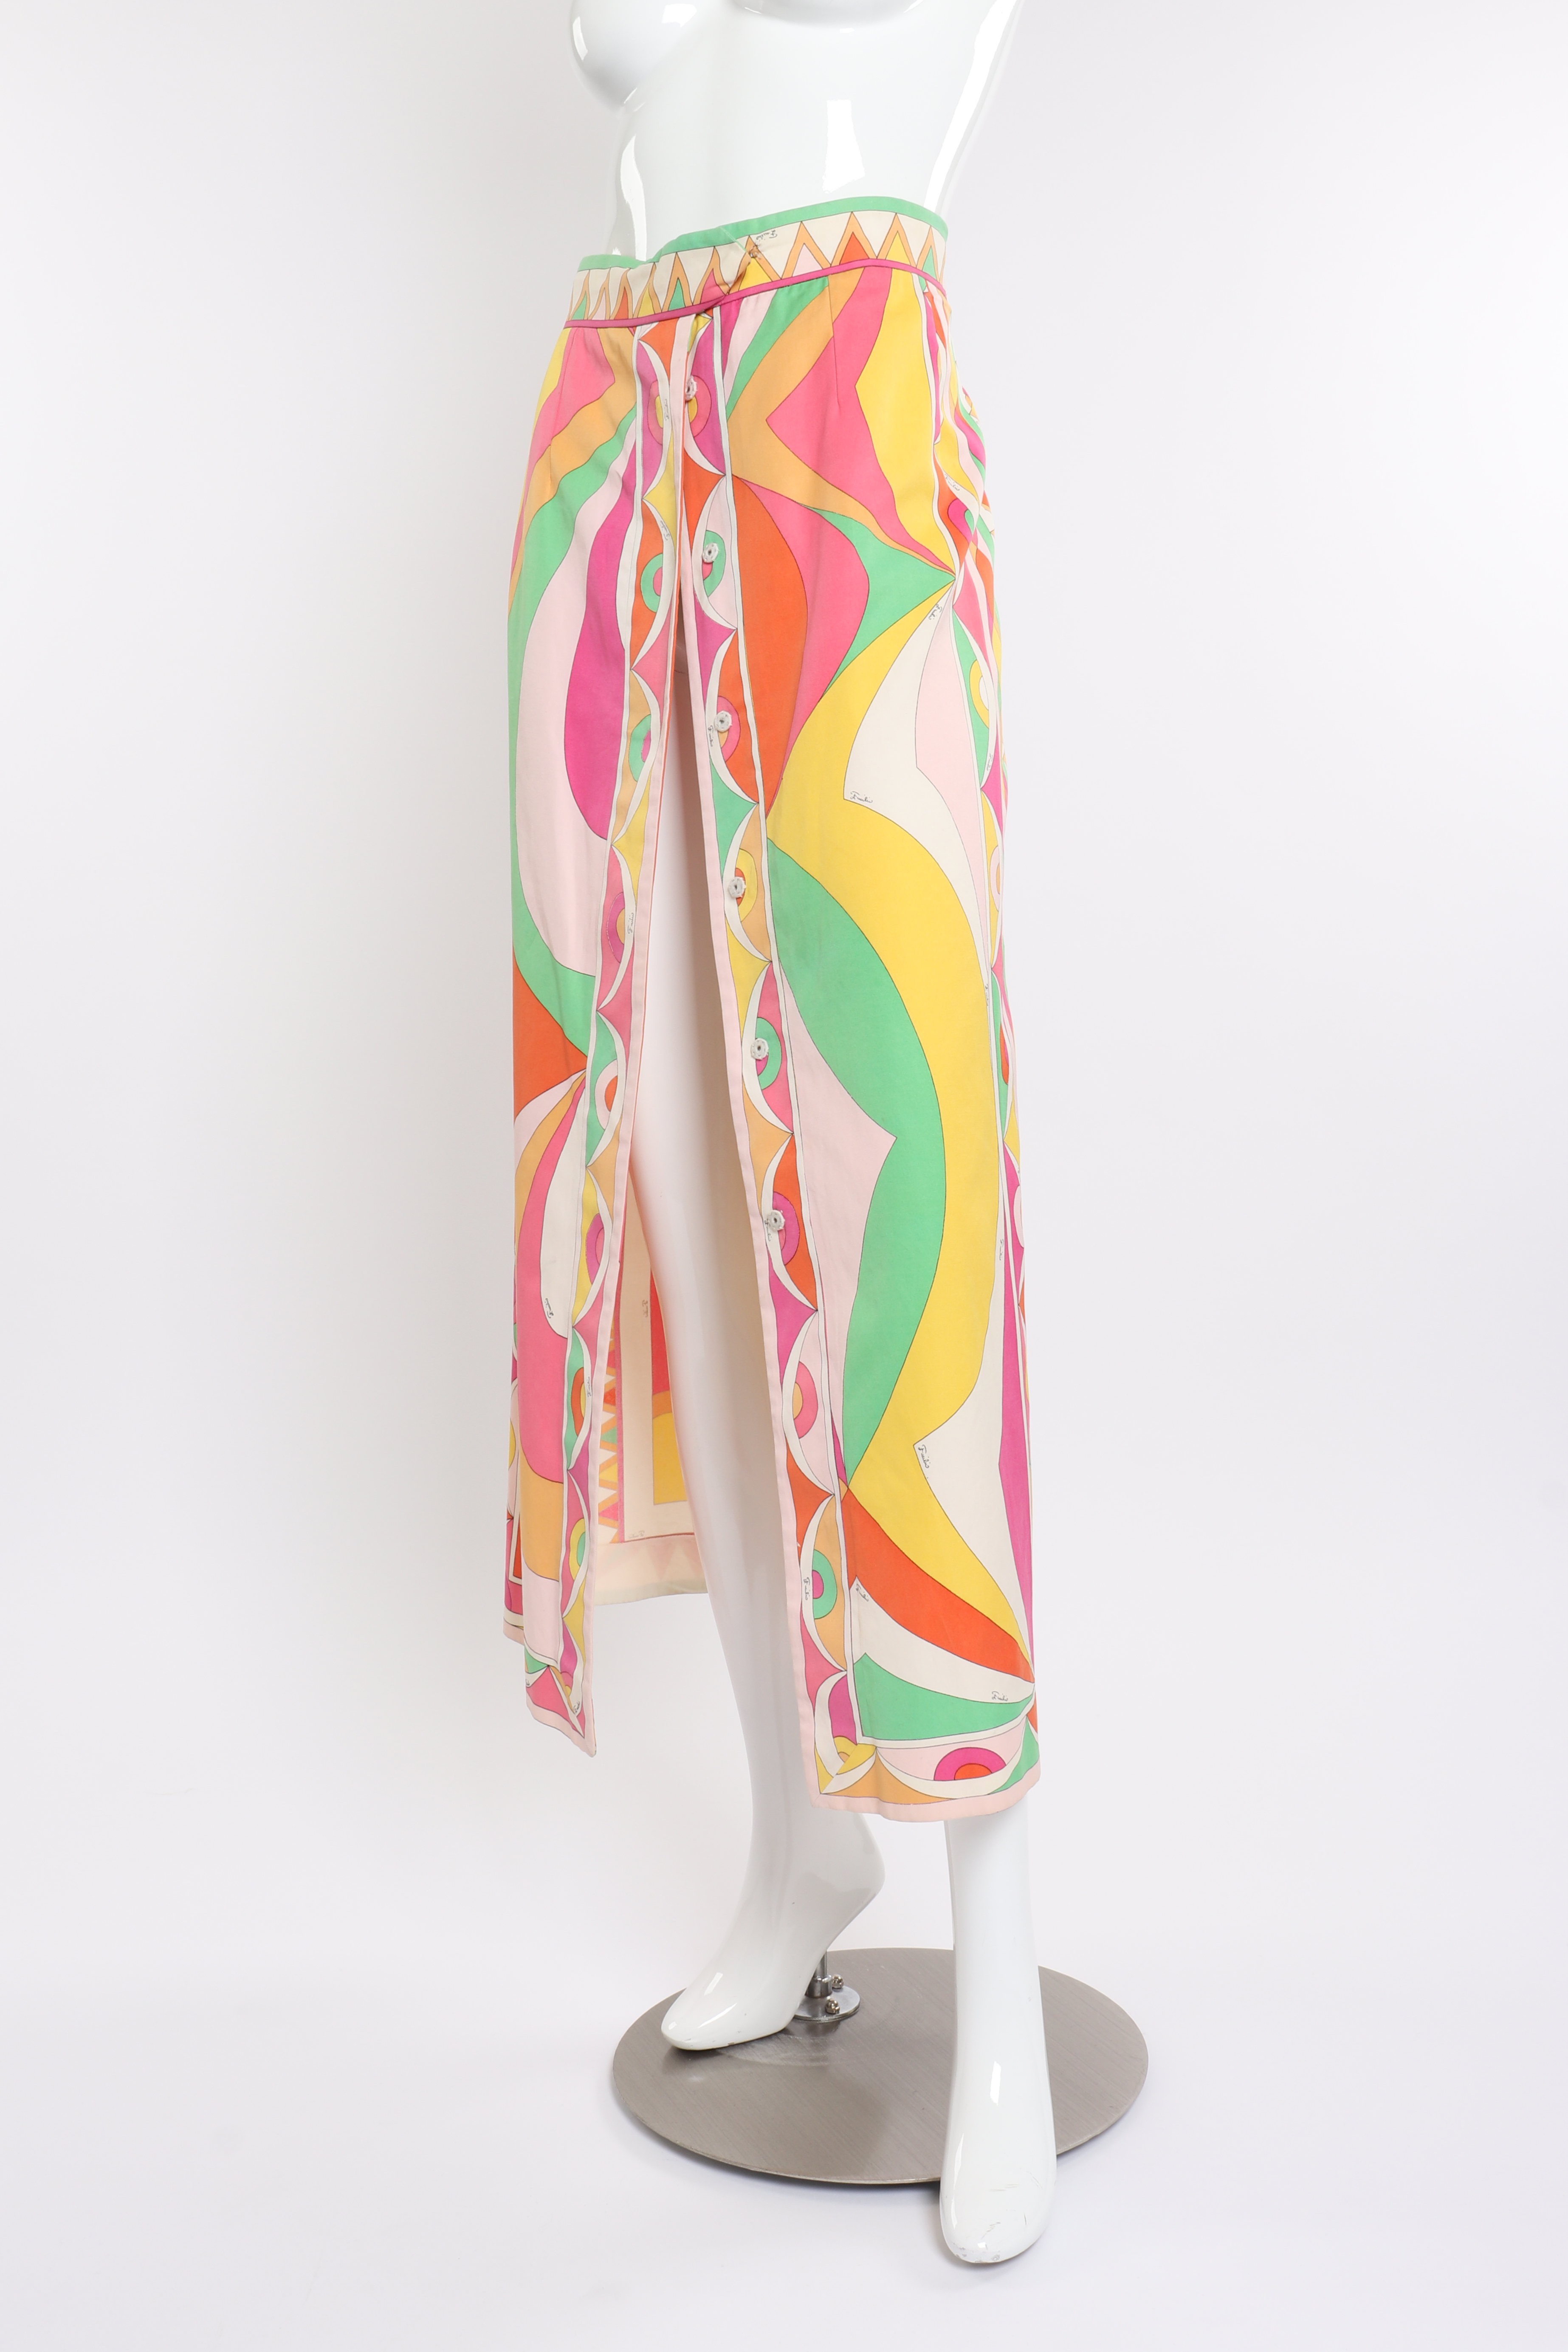 Vintage geometric graphic printed maxi skirt as worn open on mannequin @RECESS LA